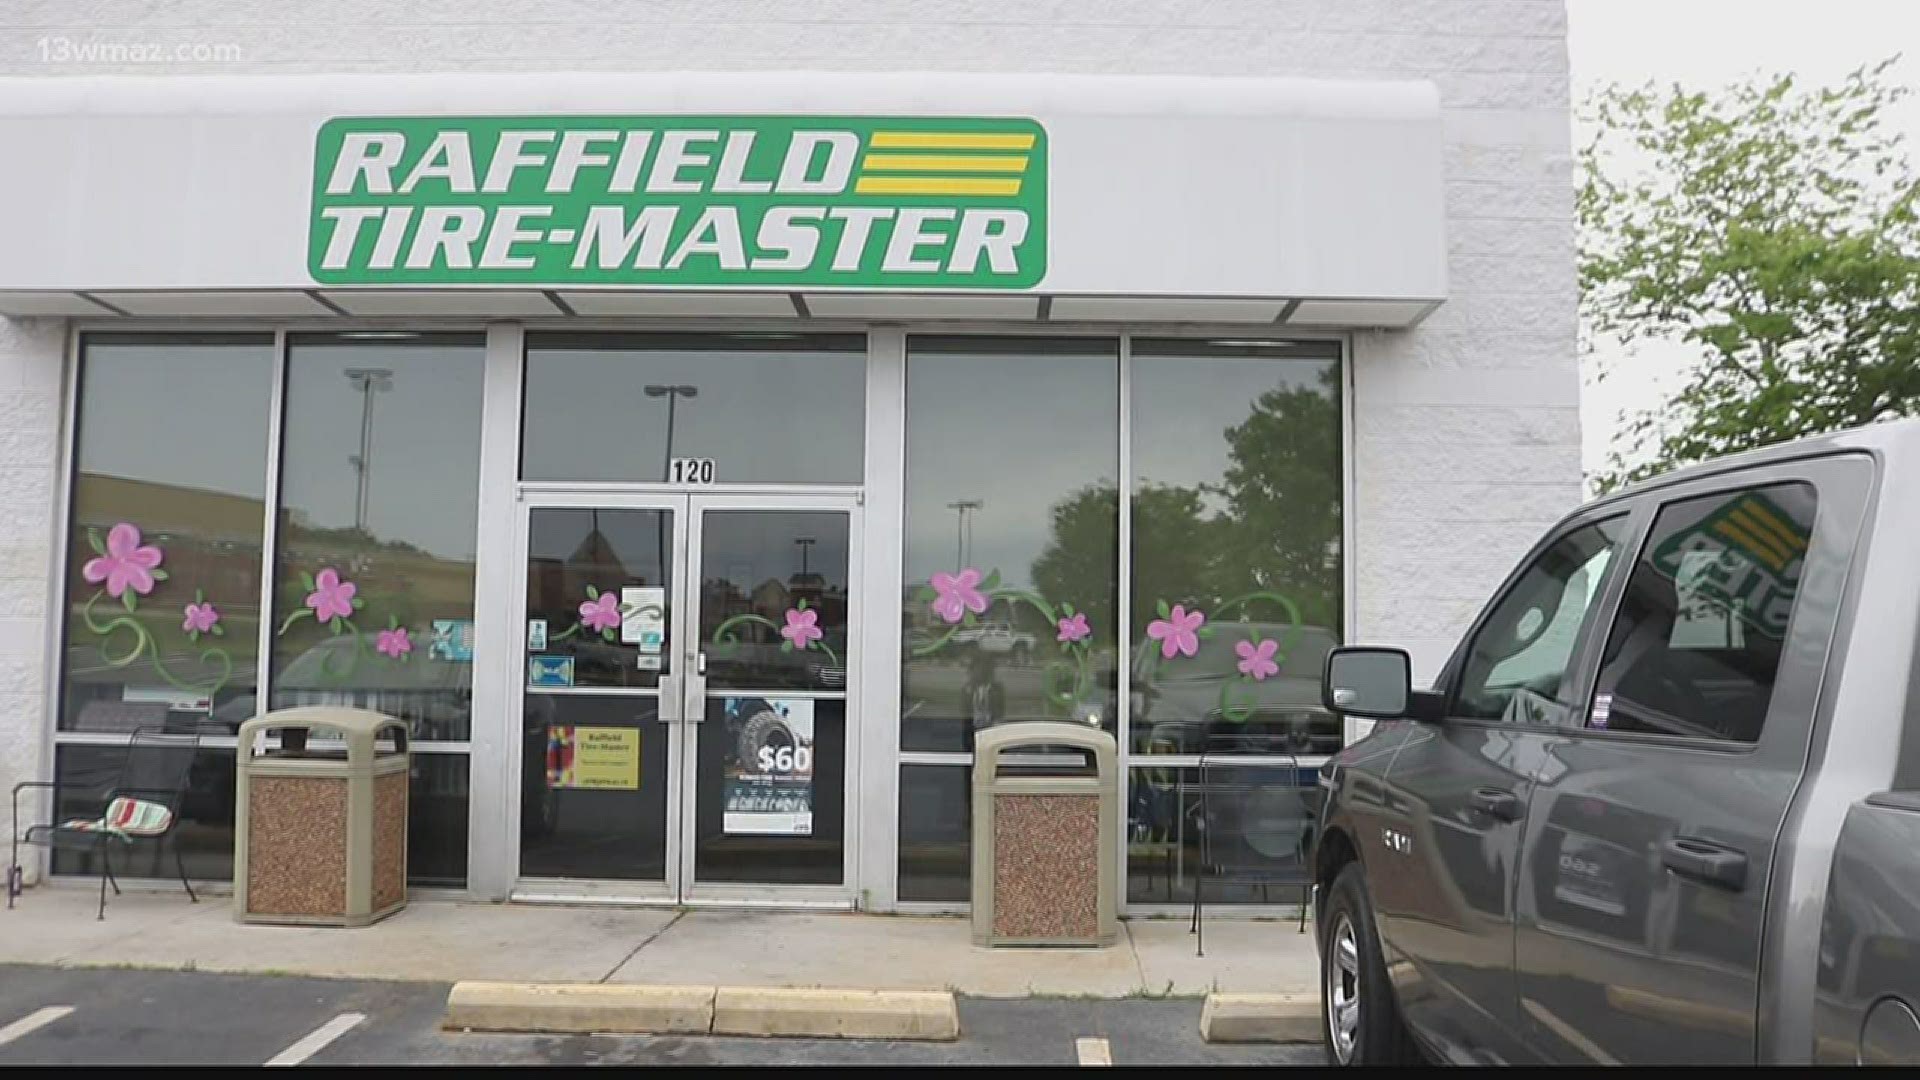 Raffield Tire Master has been fixing cars in Central Georgia for over 56 years and they don't plan on stopping anytime soon.